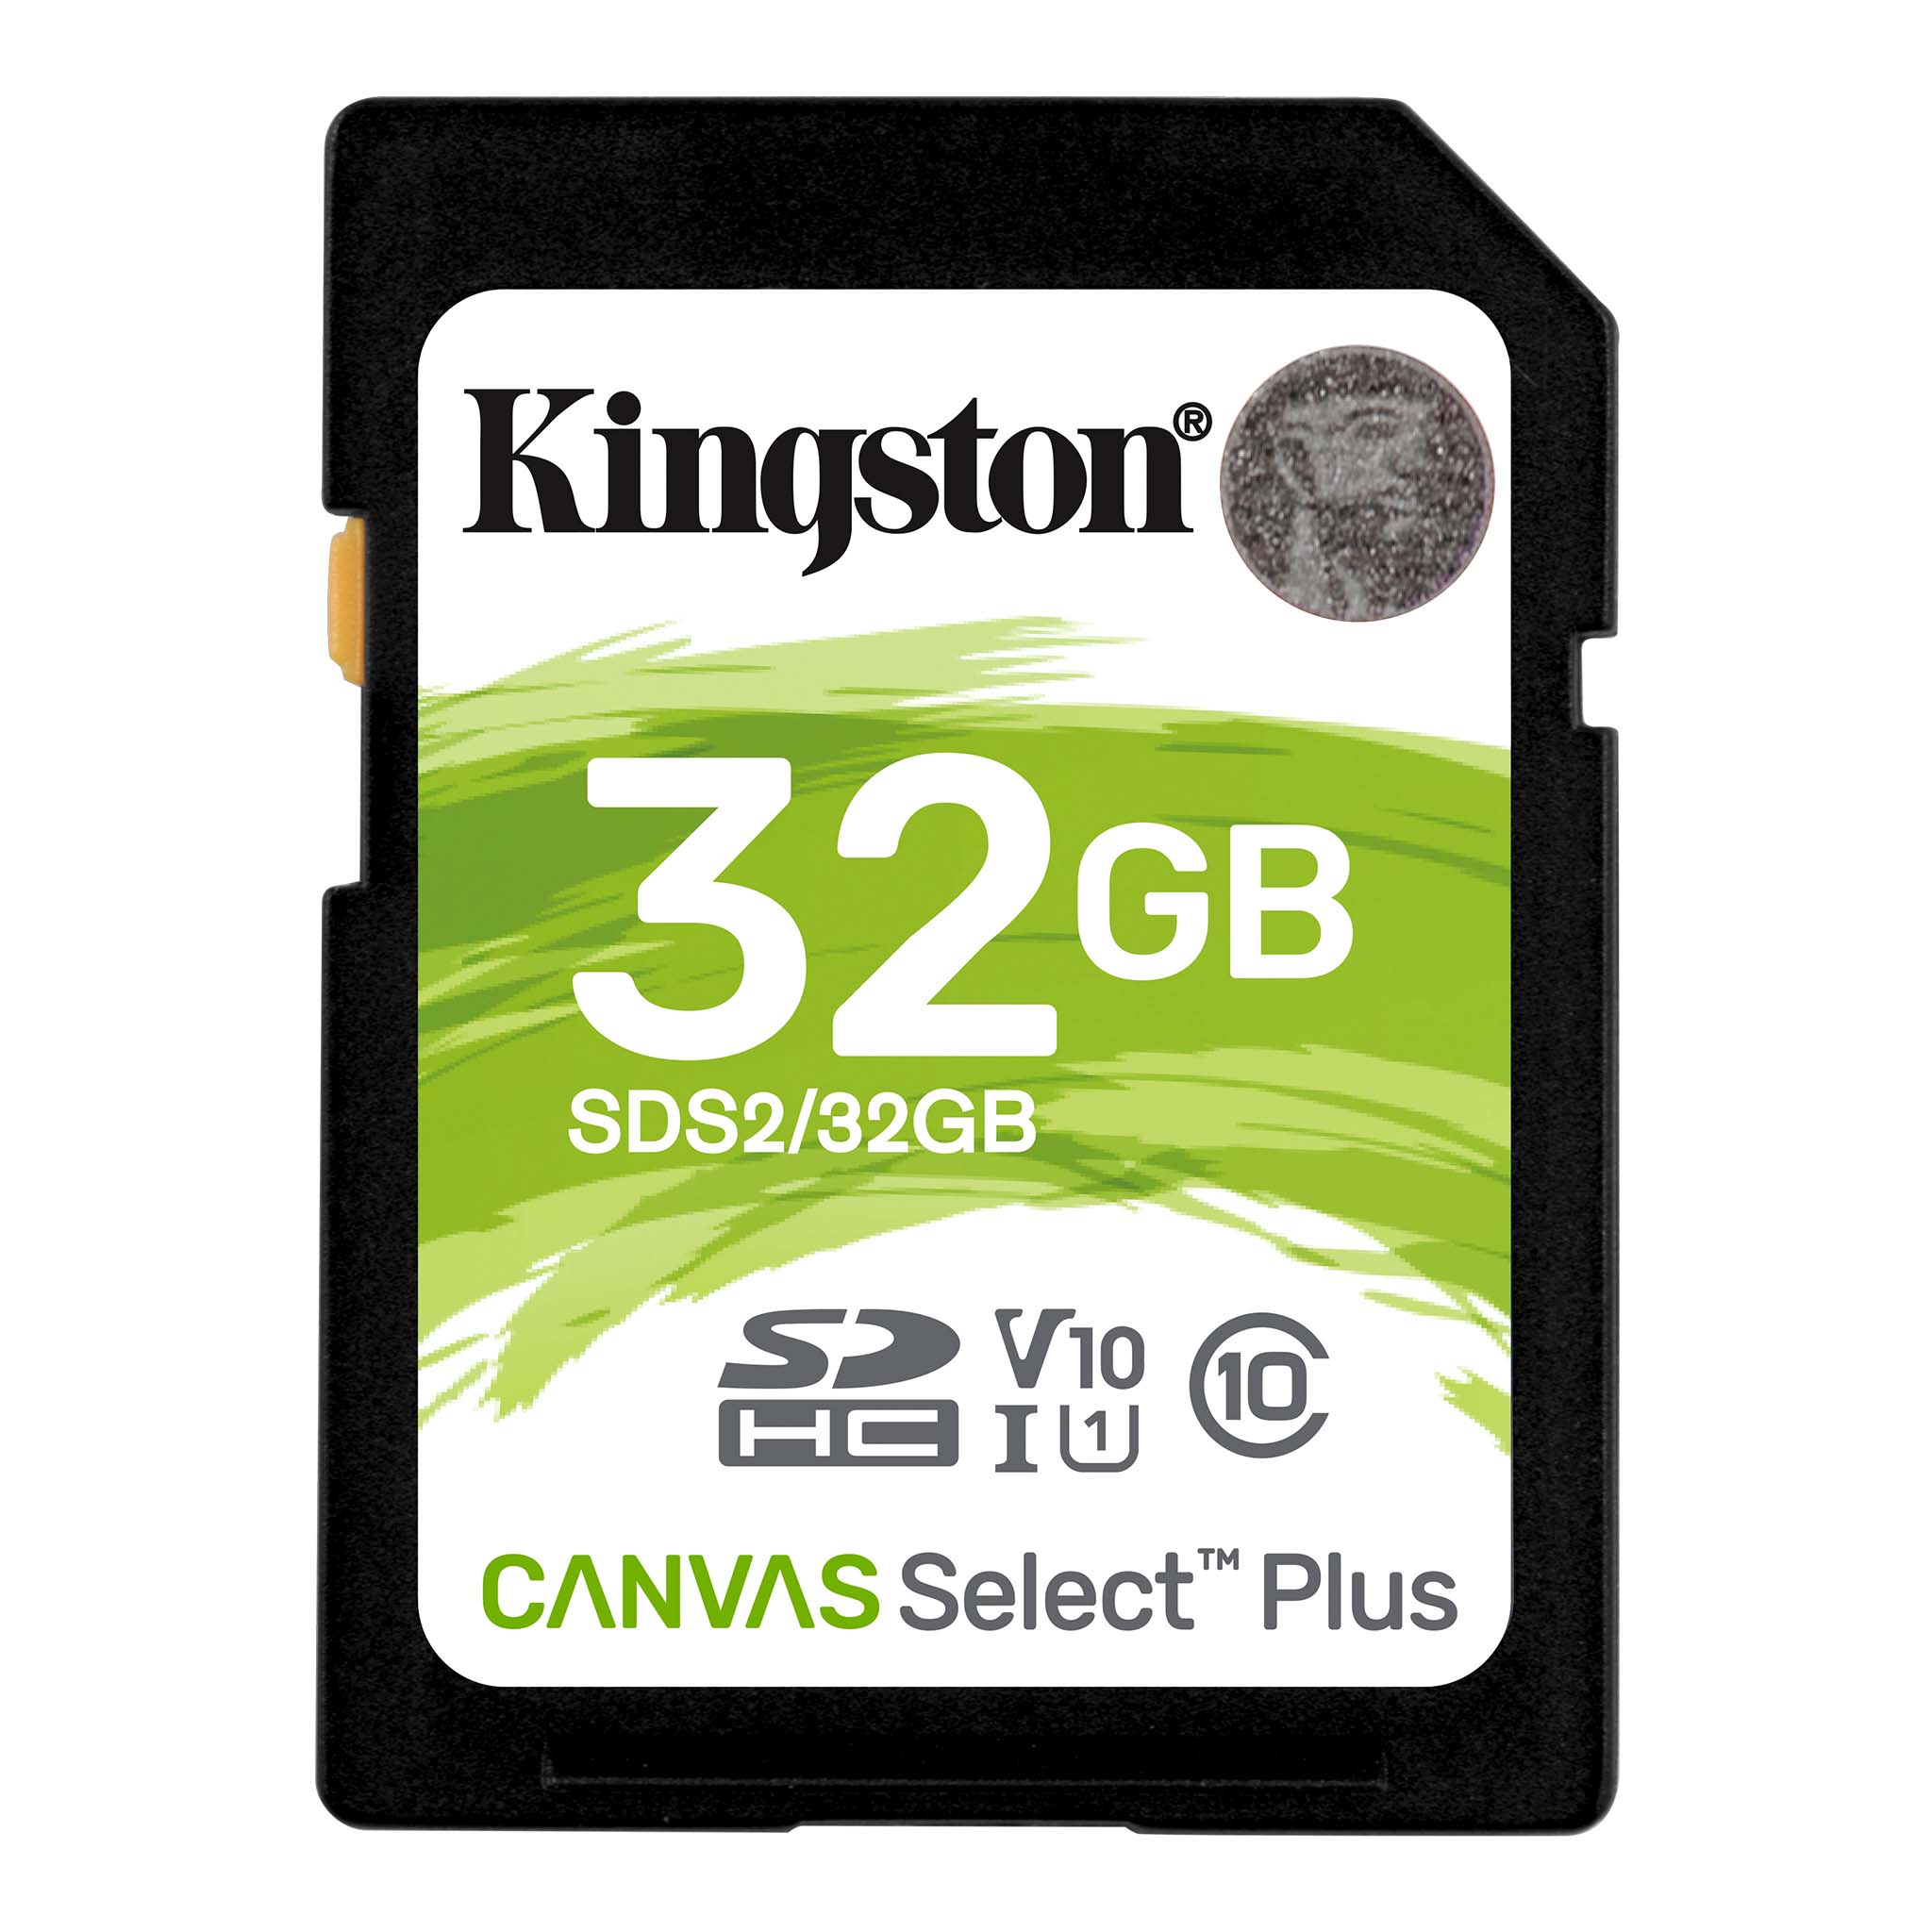 100MBs Works with Kingston Kingston 32GB Xolo Q500s IPS MicroSDHC Canvas Select Plus Card Verified by SanFlash. 